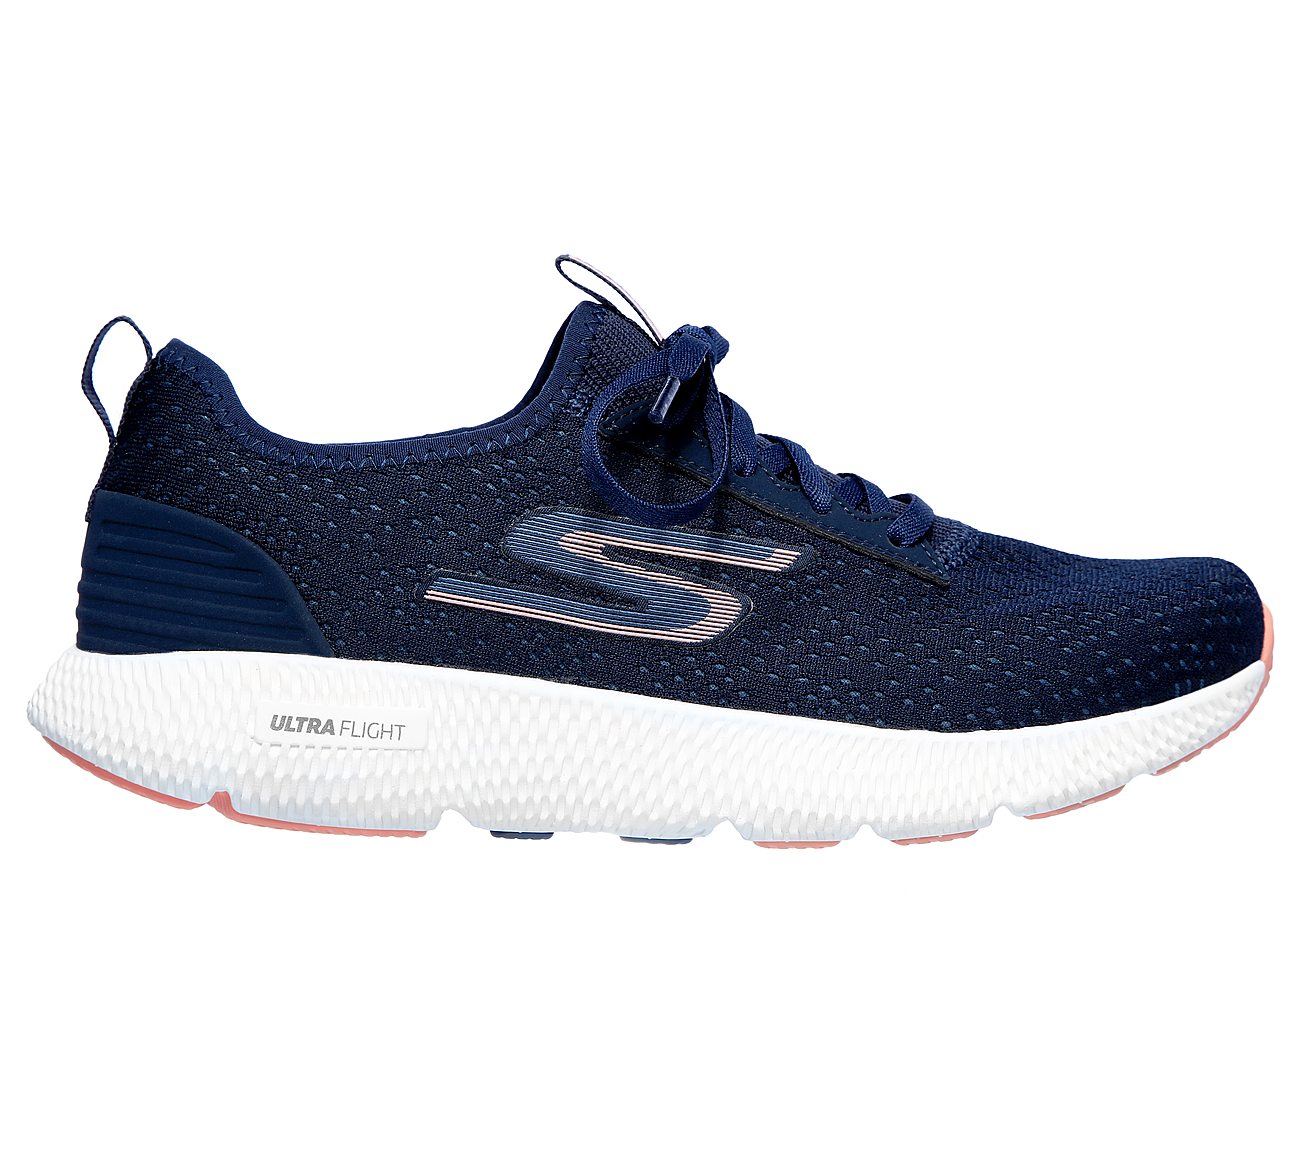 HORIZON - COOL IT, NAVY/CORAL Footwear Lateral View